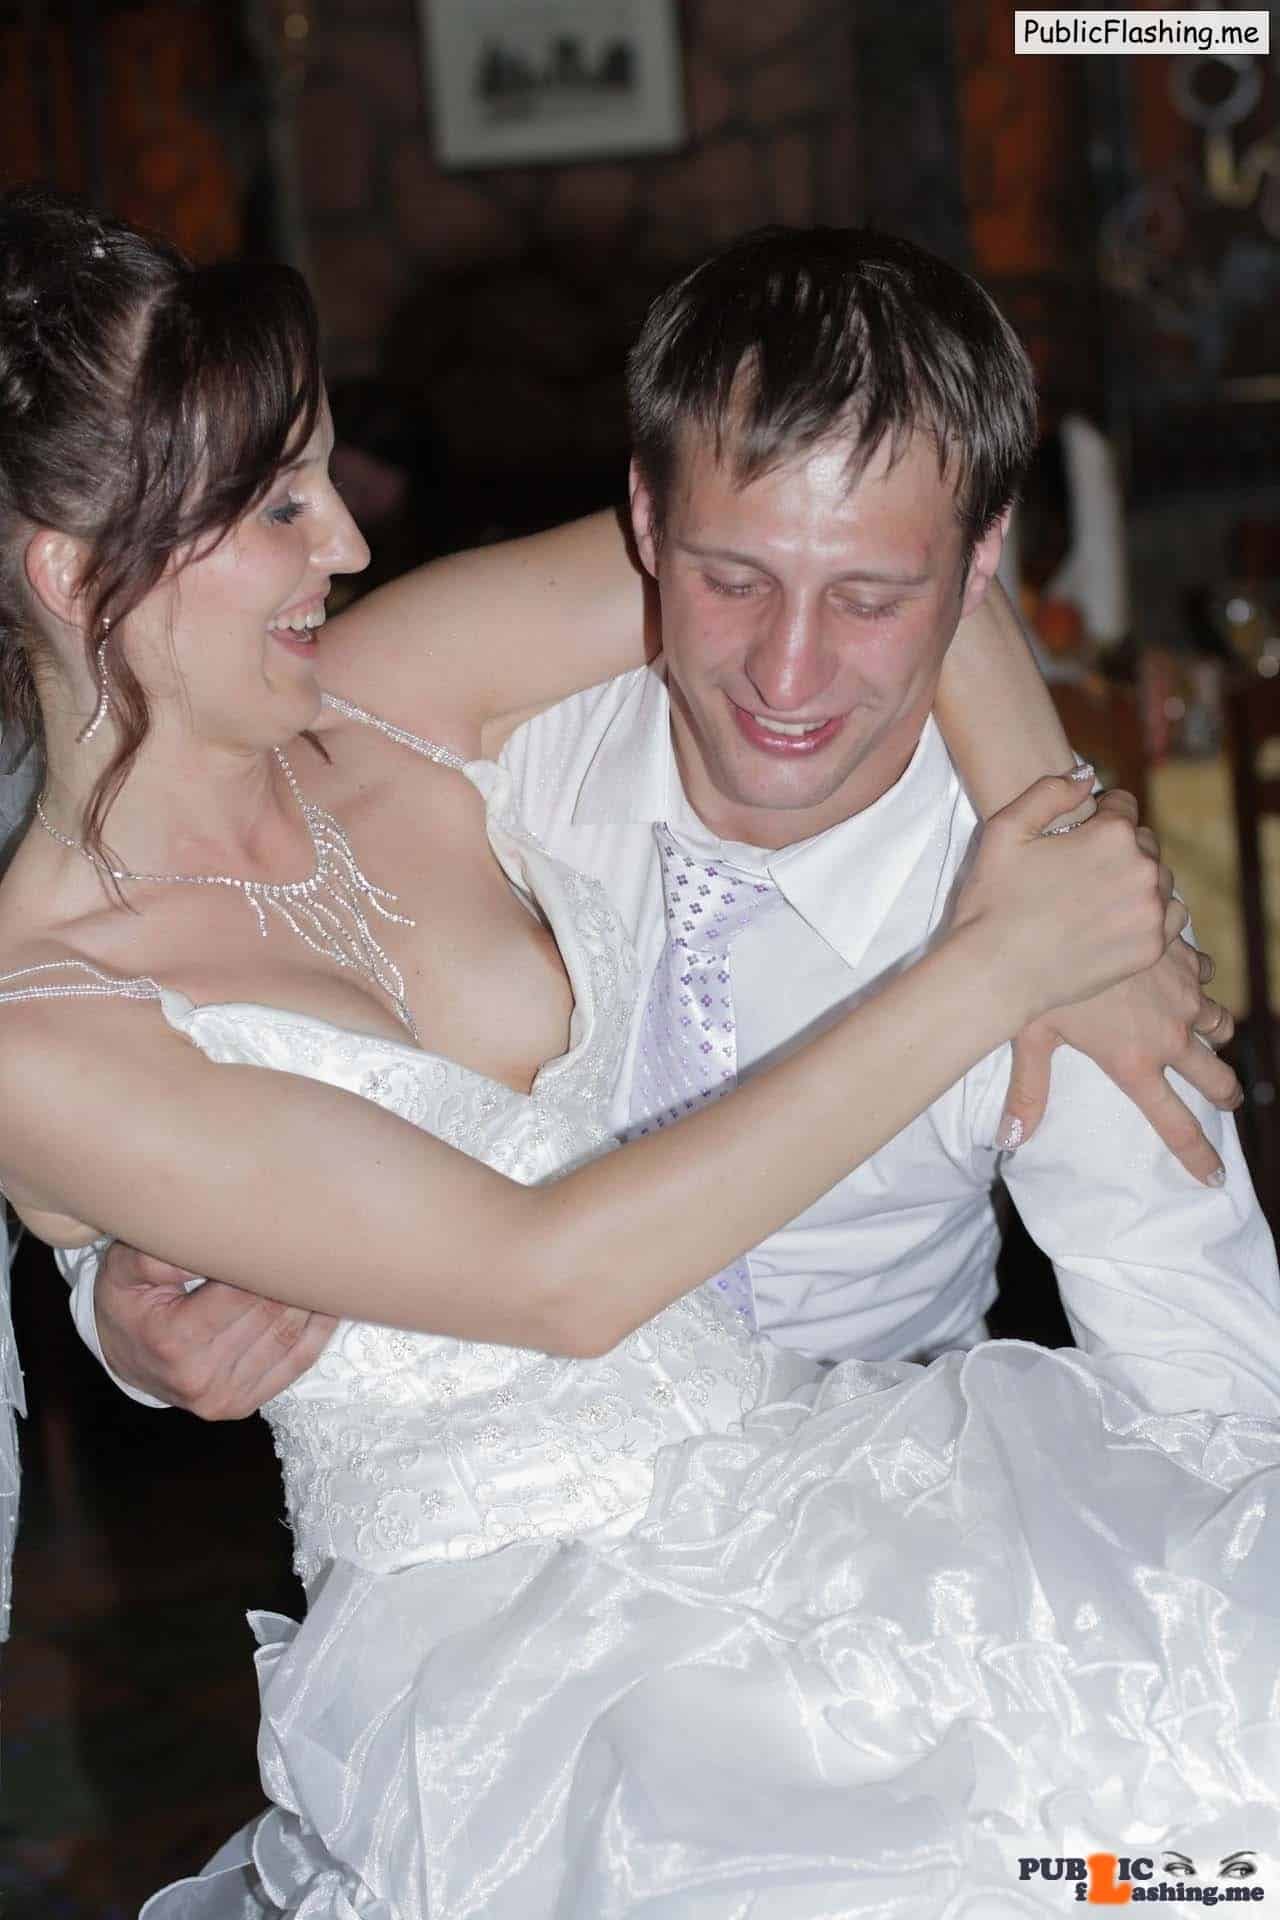 nipple slip - Accidental nipple slip on wedding Embarrassing photo of the English bride where her naughty nipple got caught by camera lens. While she was being carried by her broom her light brown nipple popped out of the decolletage. This put a... - Amateur